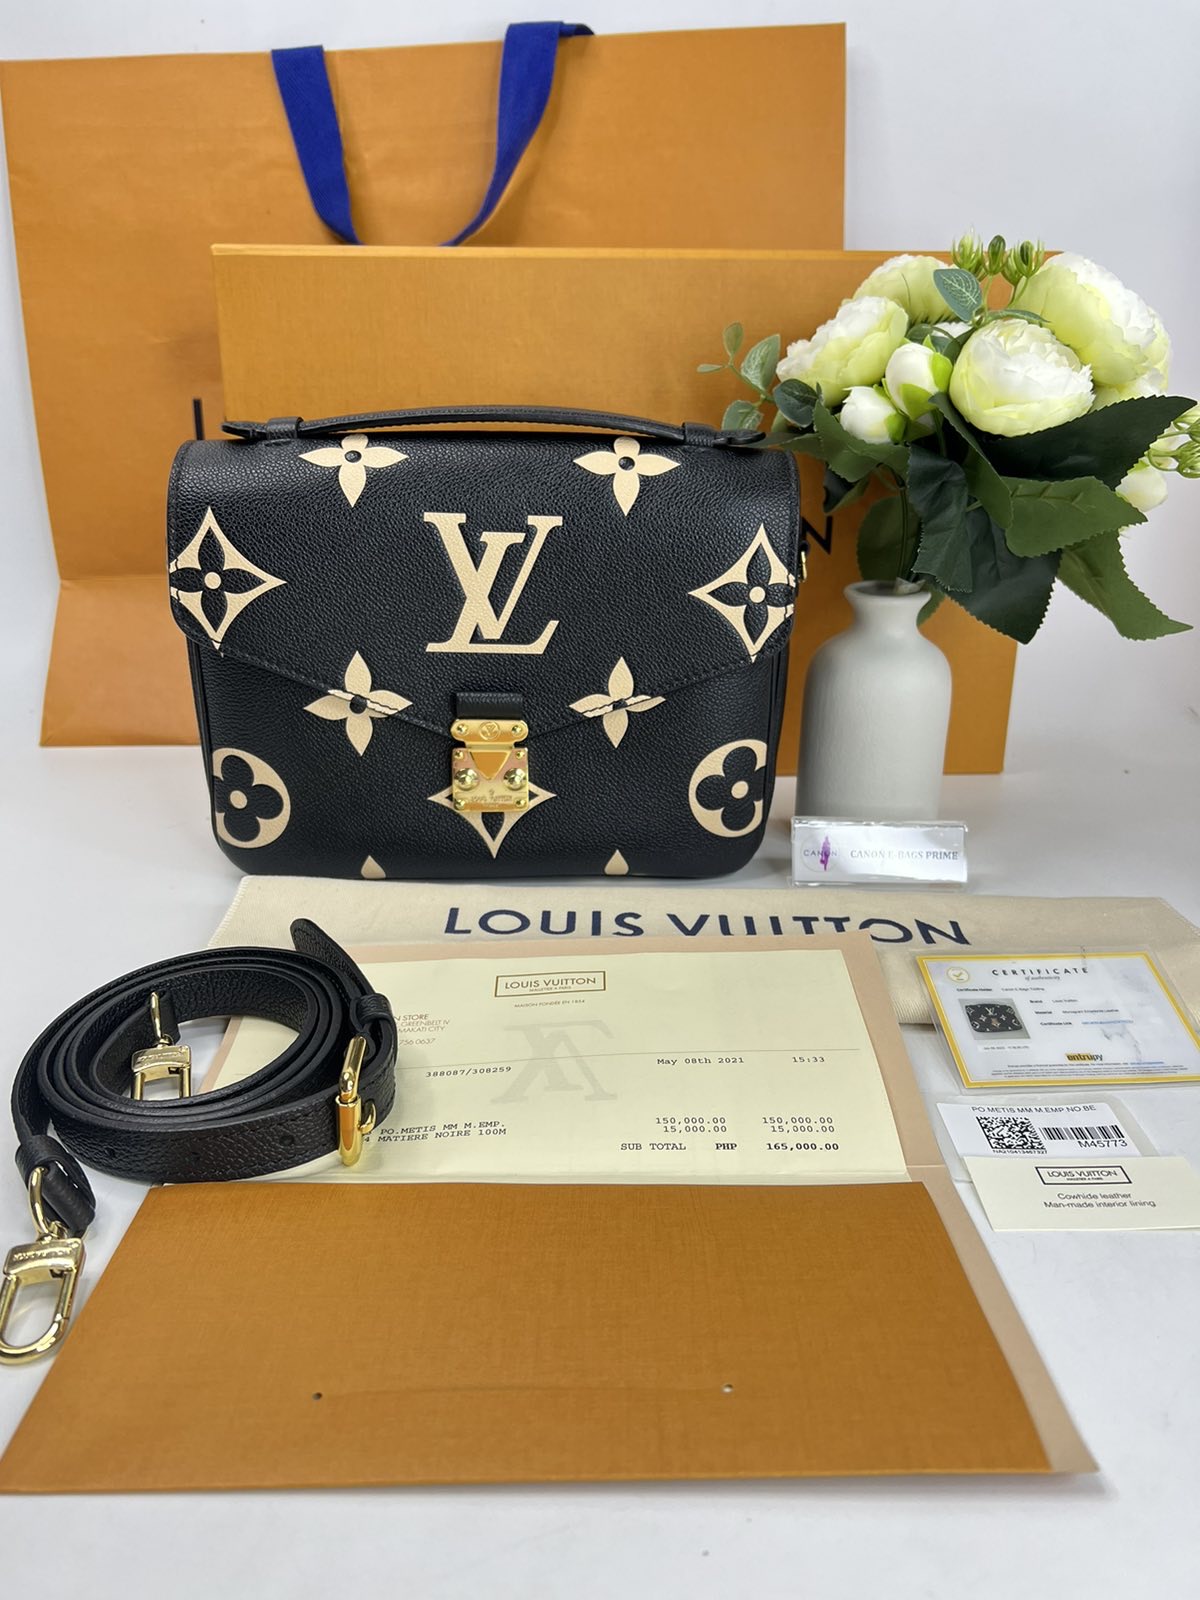 Louis Vuitton Bicolor Empreinte Compact Wallet. Microchip. Made in France.  With box & certificate of authenticity from ENTRUPY ❤️